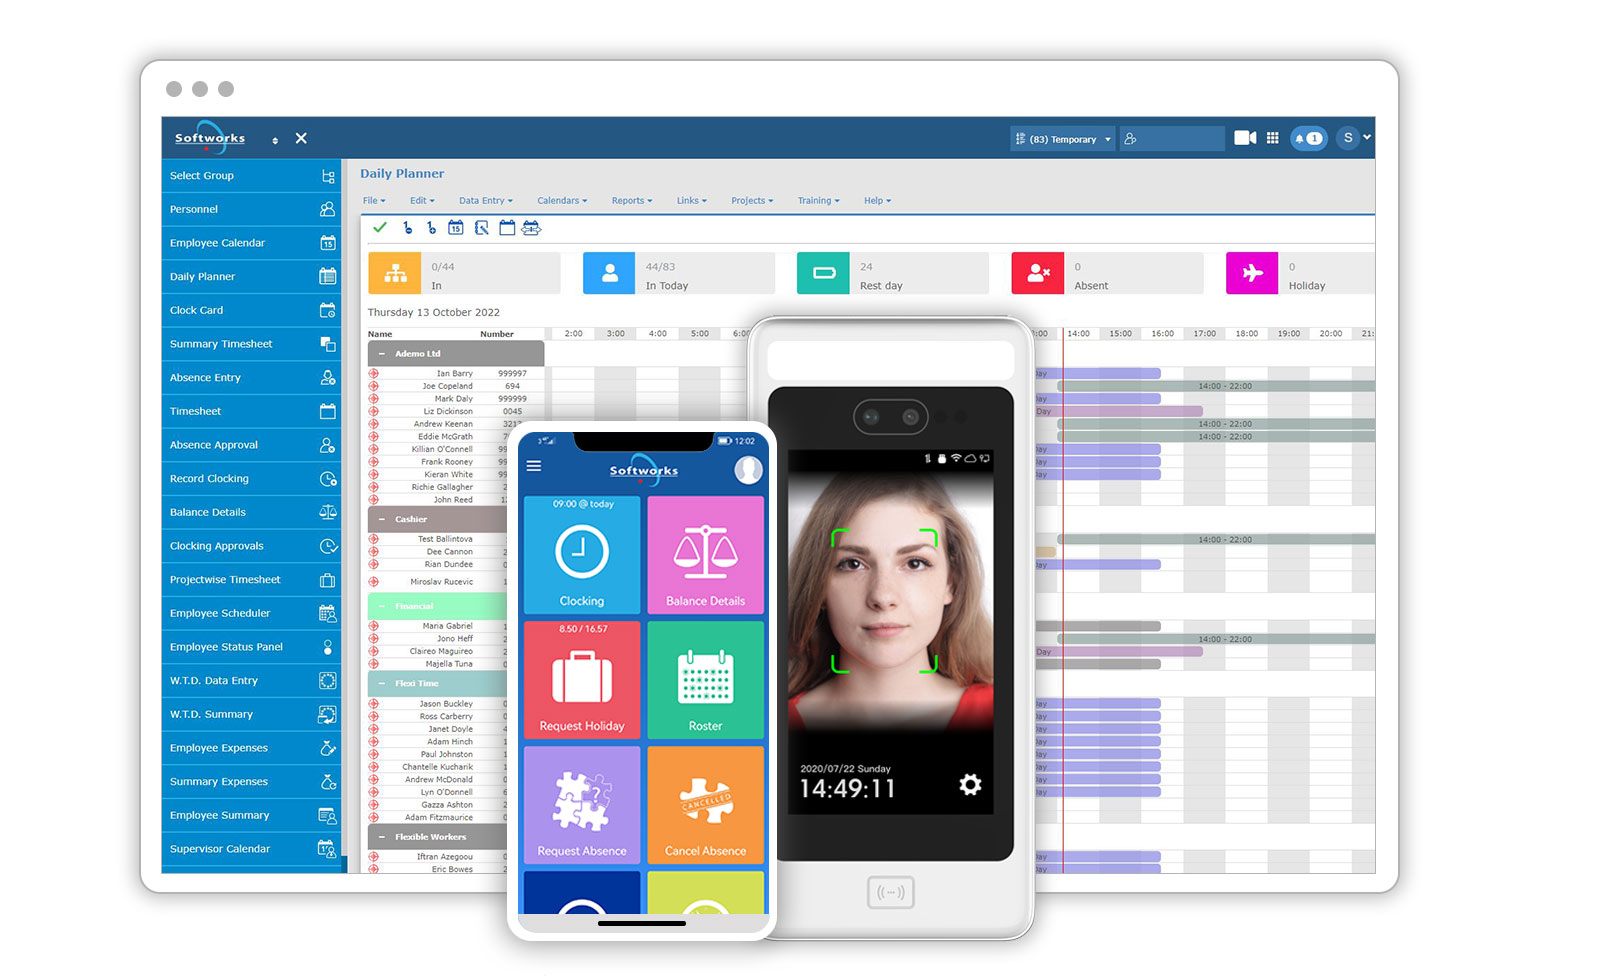 Screenshot of Softworks Workforce Management Software together with Softworks Self-Service App shown on mobile, and Facial Recognition Clocking Device next to it.